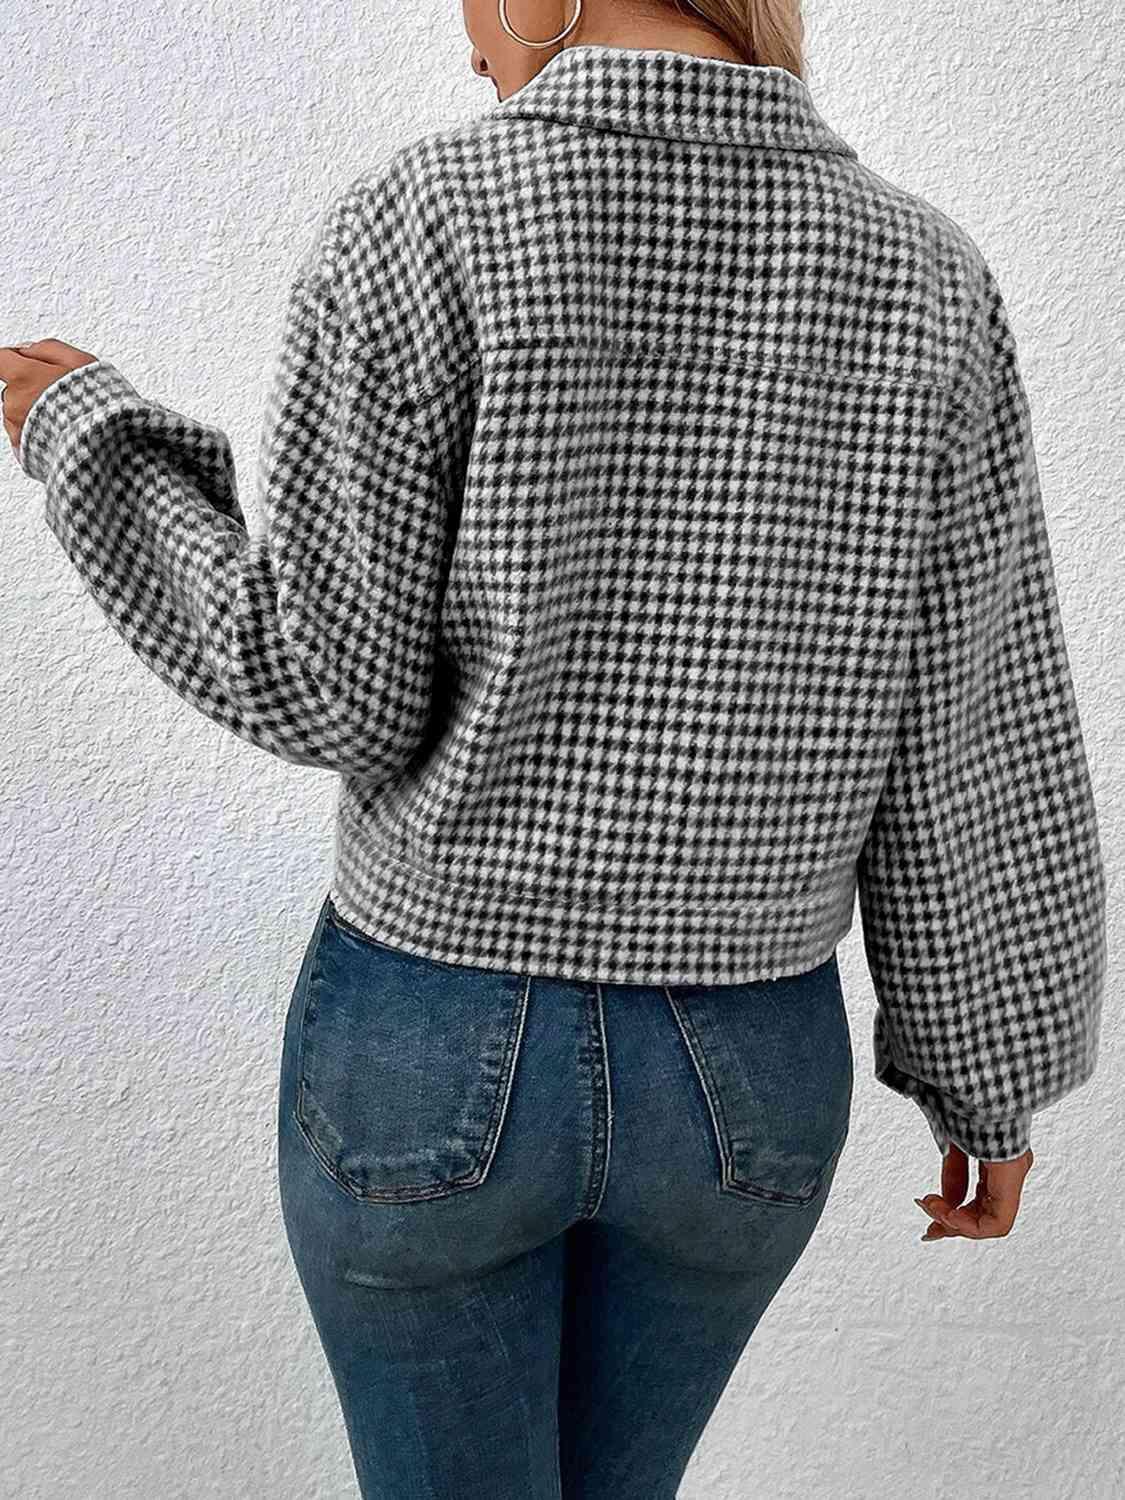 Houndstooth Collared Neck Button Up Jacket - Bona Fide Fashion